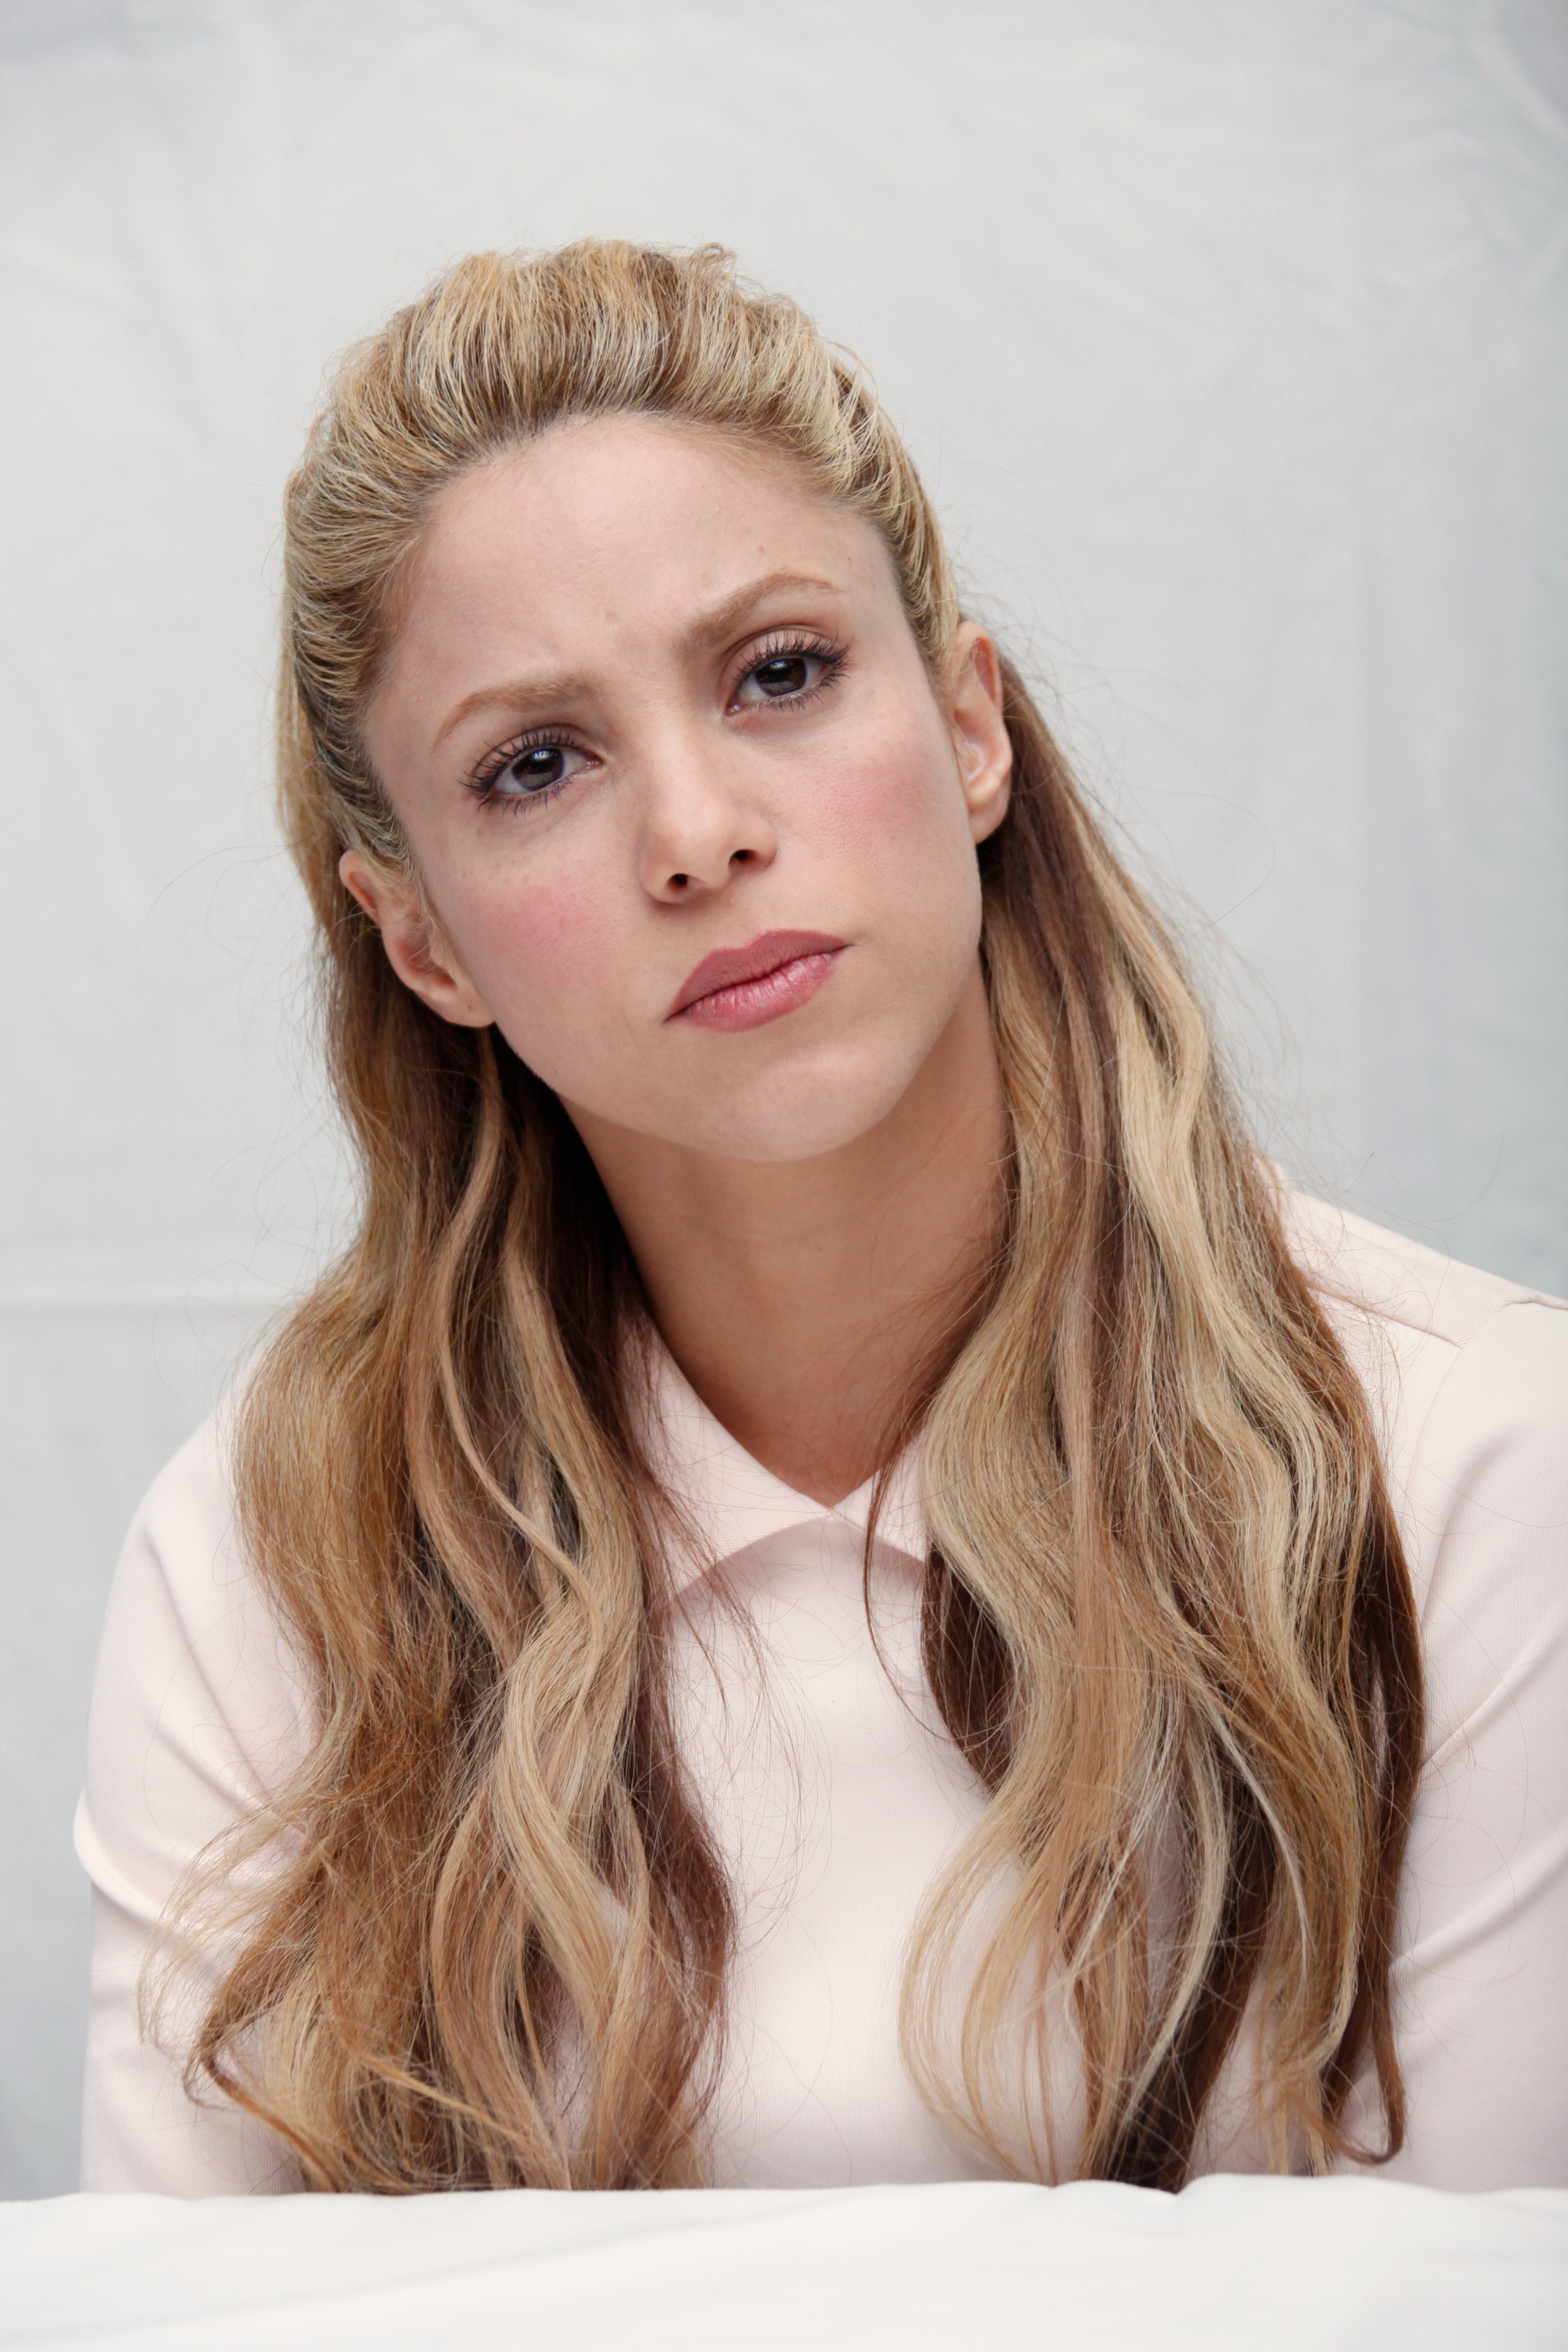 Singer Shakira attending a film promotion "Zootopia", on February 17th 2016 , in West Hollywood.